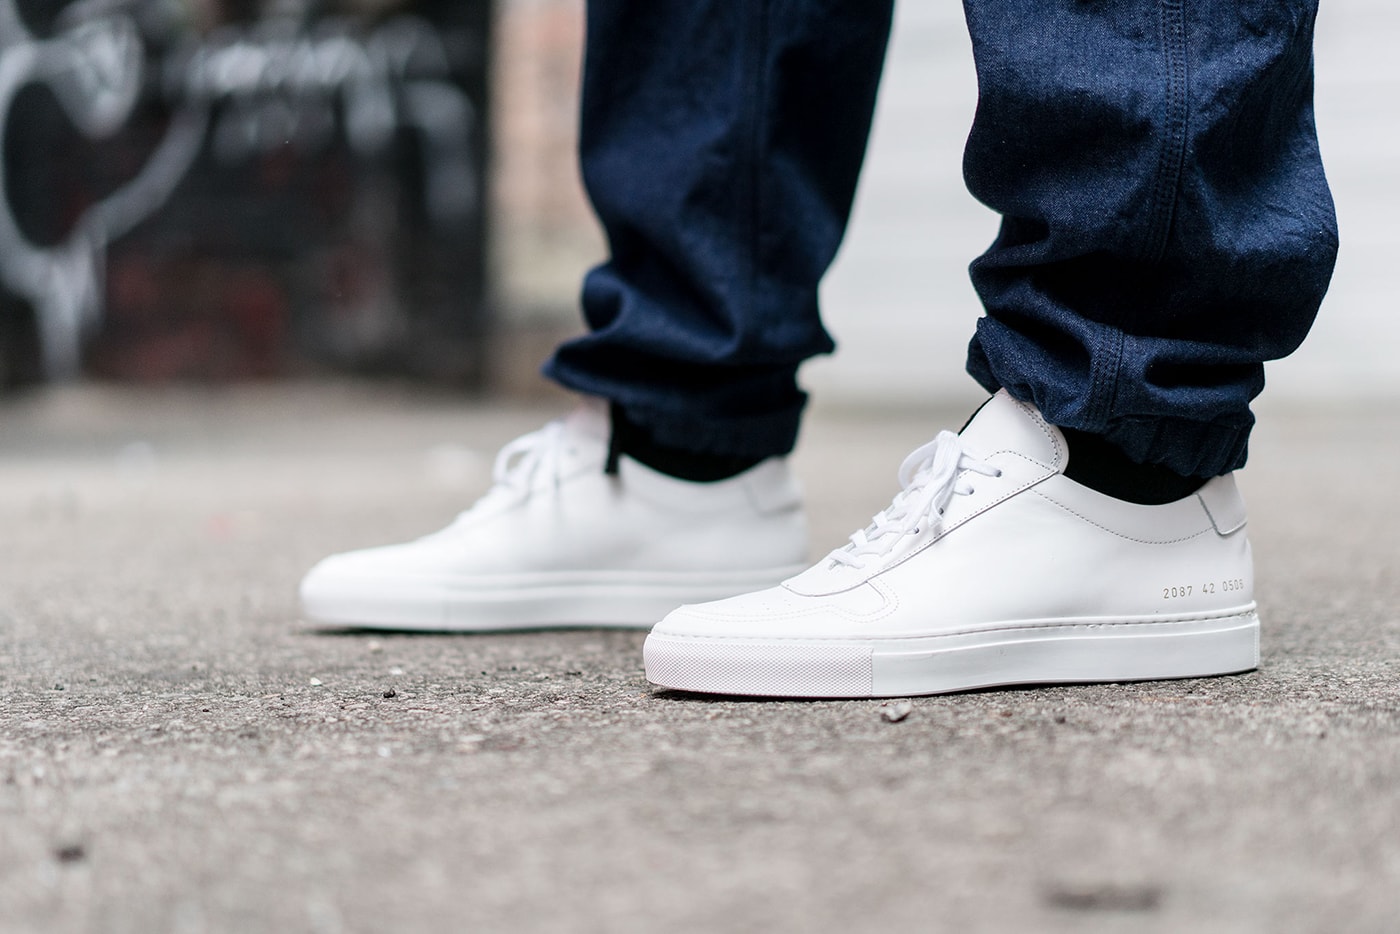 HAVEN Common Projects Engineered Garments Lookbook